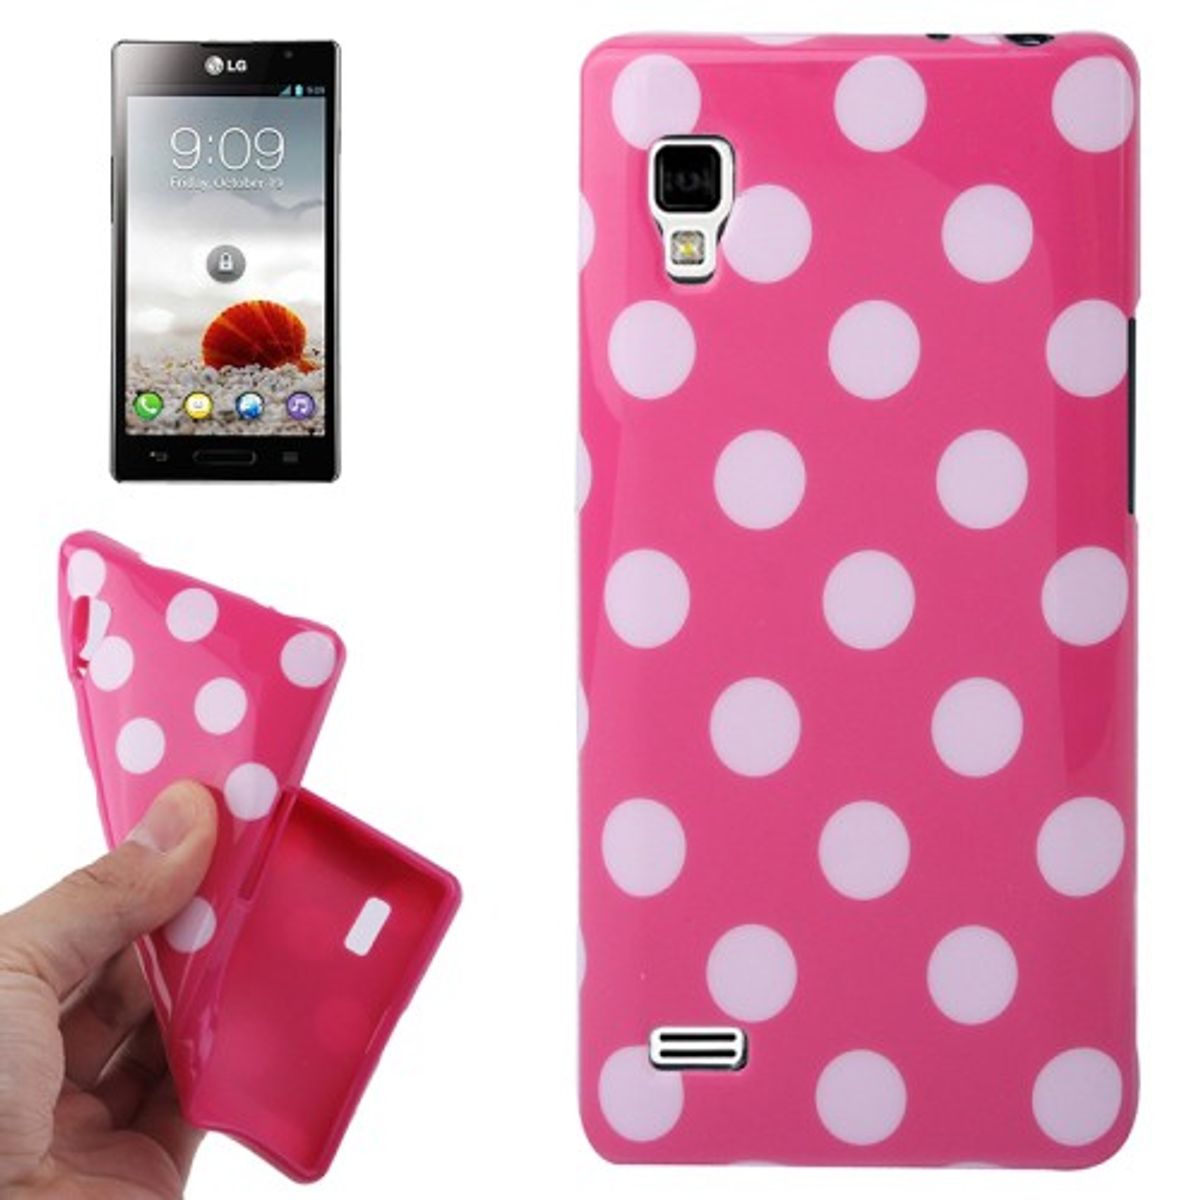 Protective TPU dots case for mobile phone Lg Optimus L9 / P760 pink